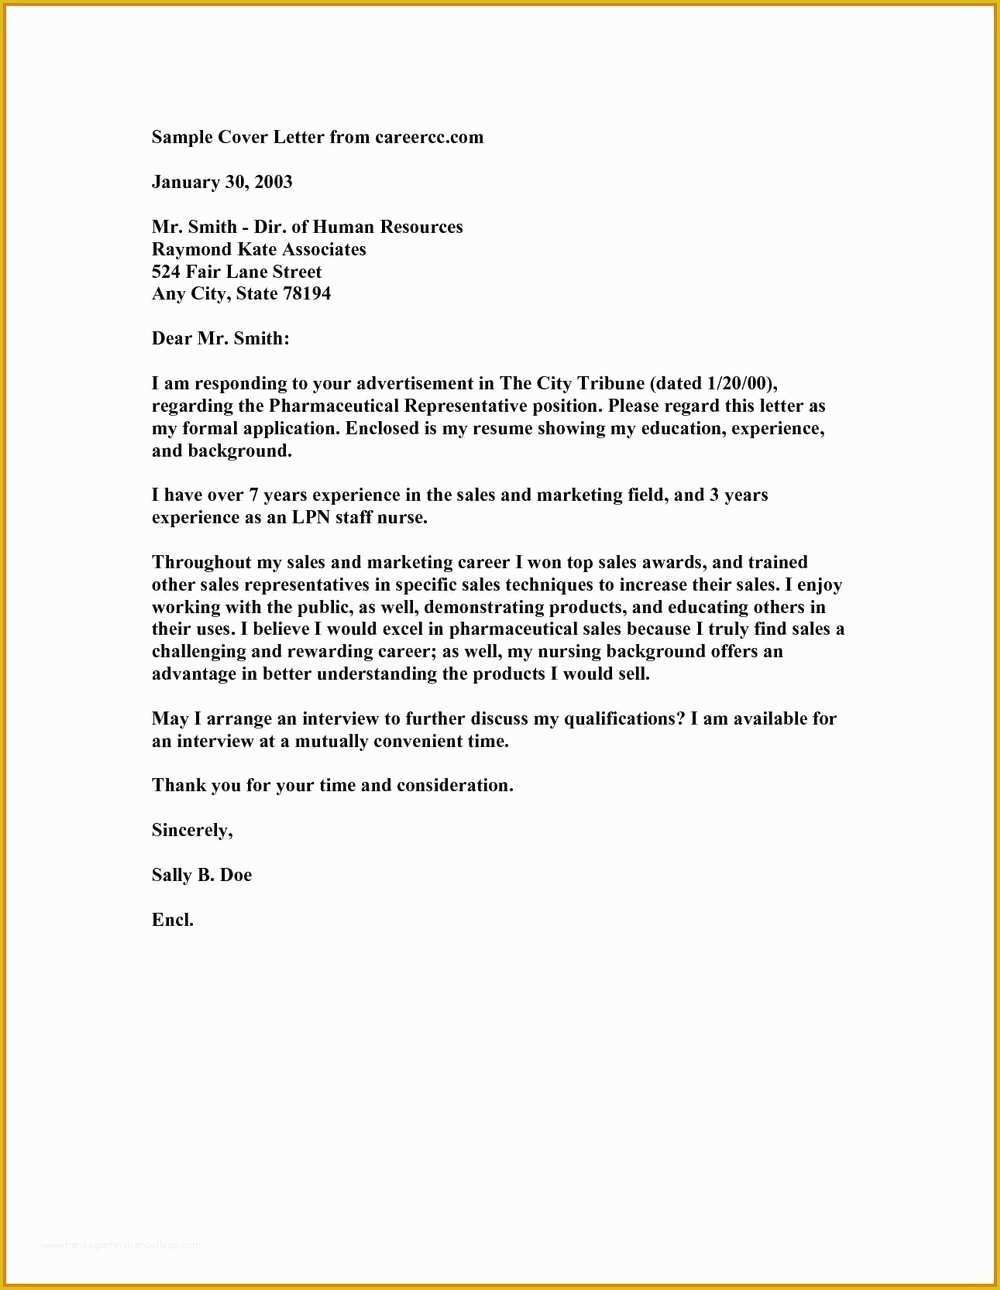 rental house application cover letter example